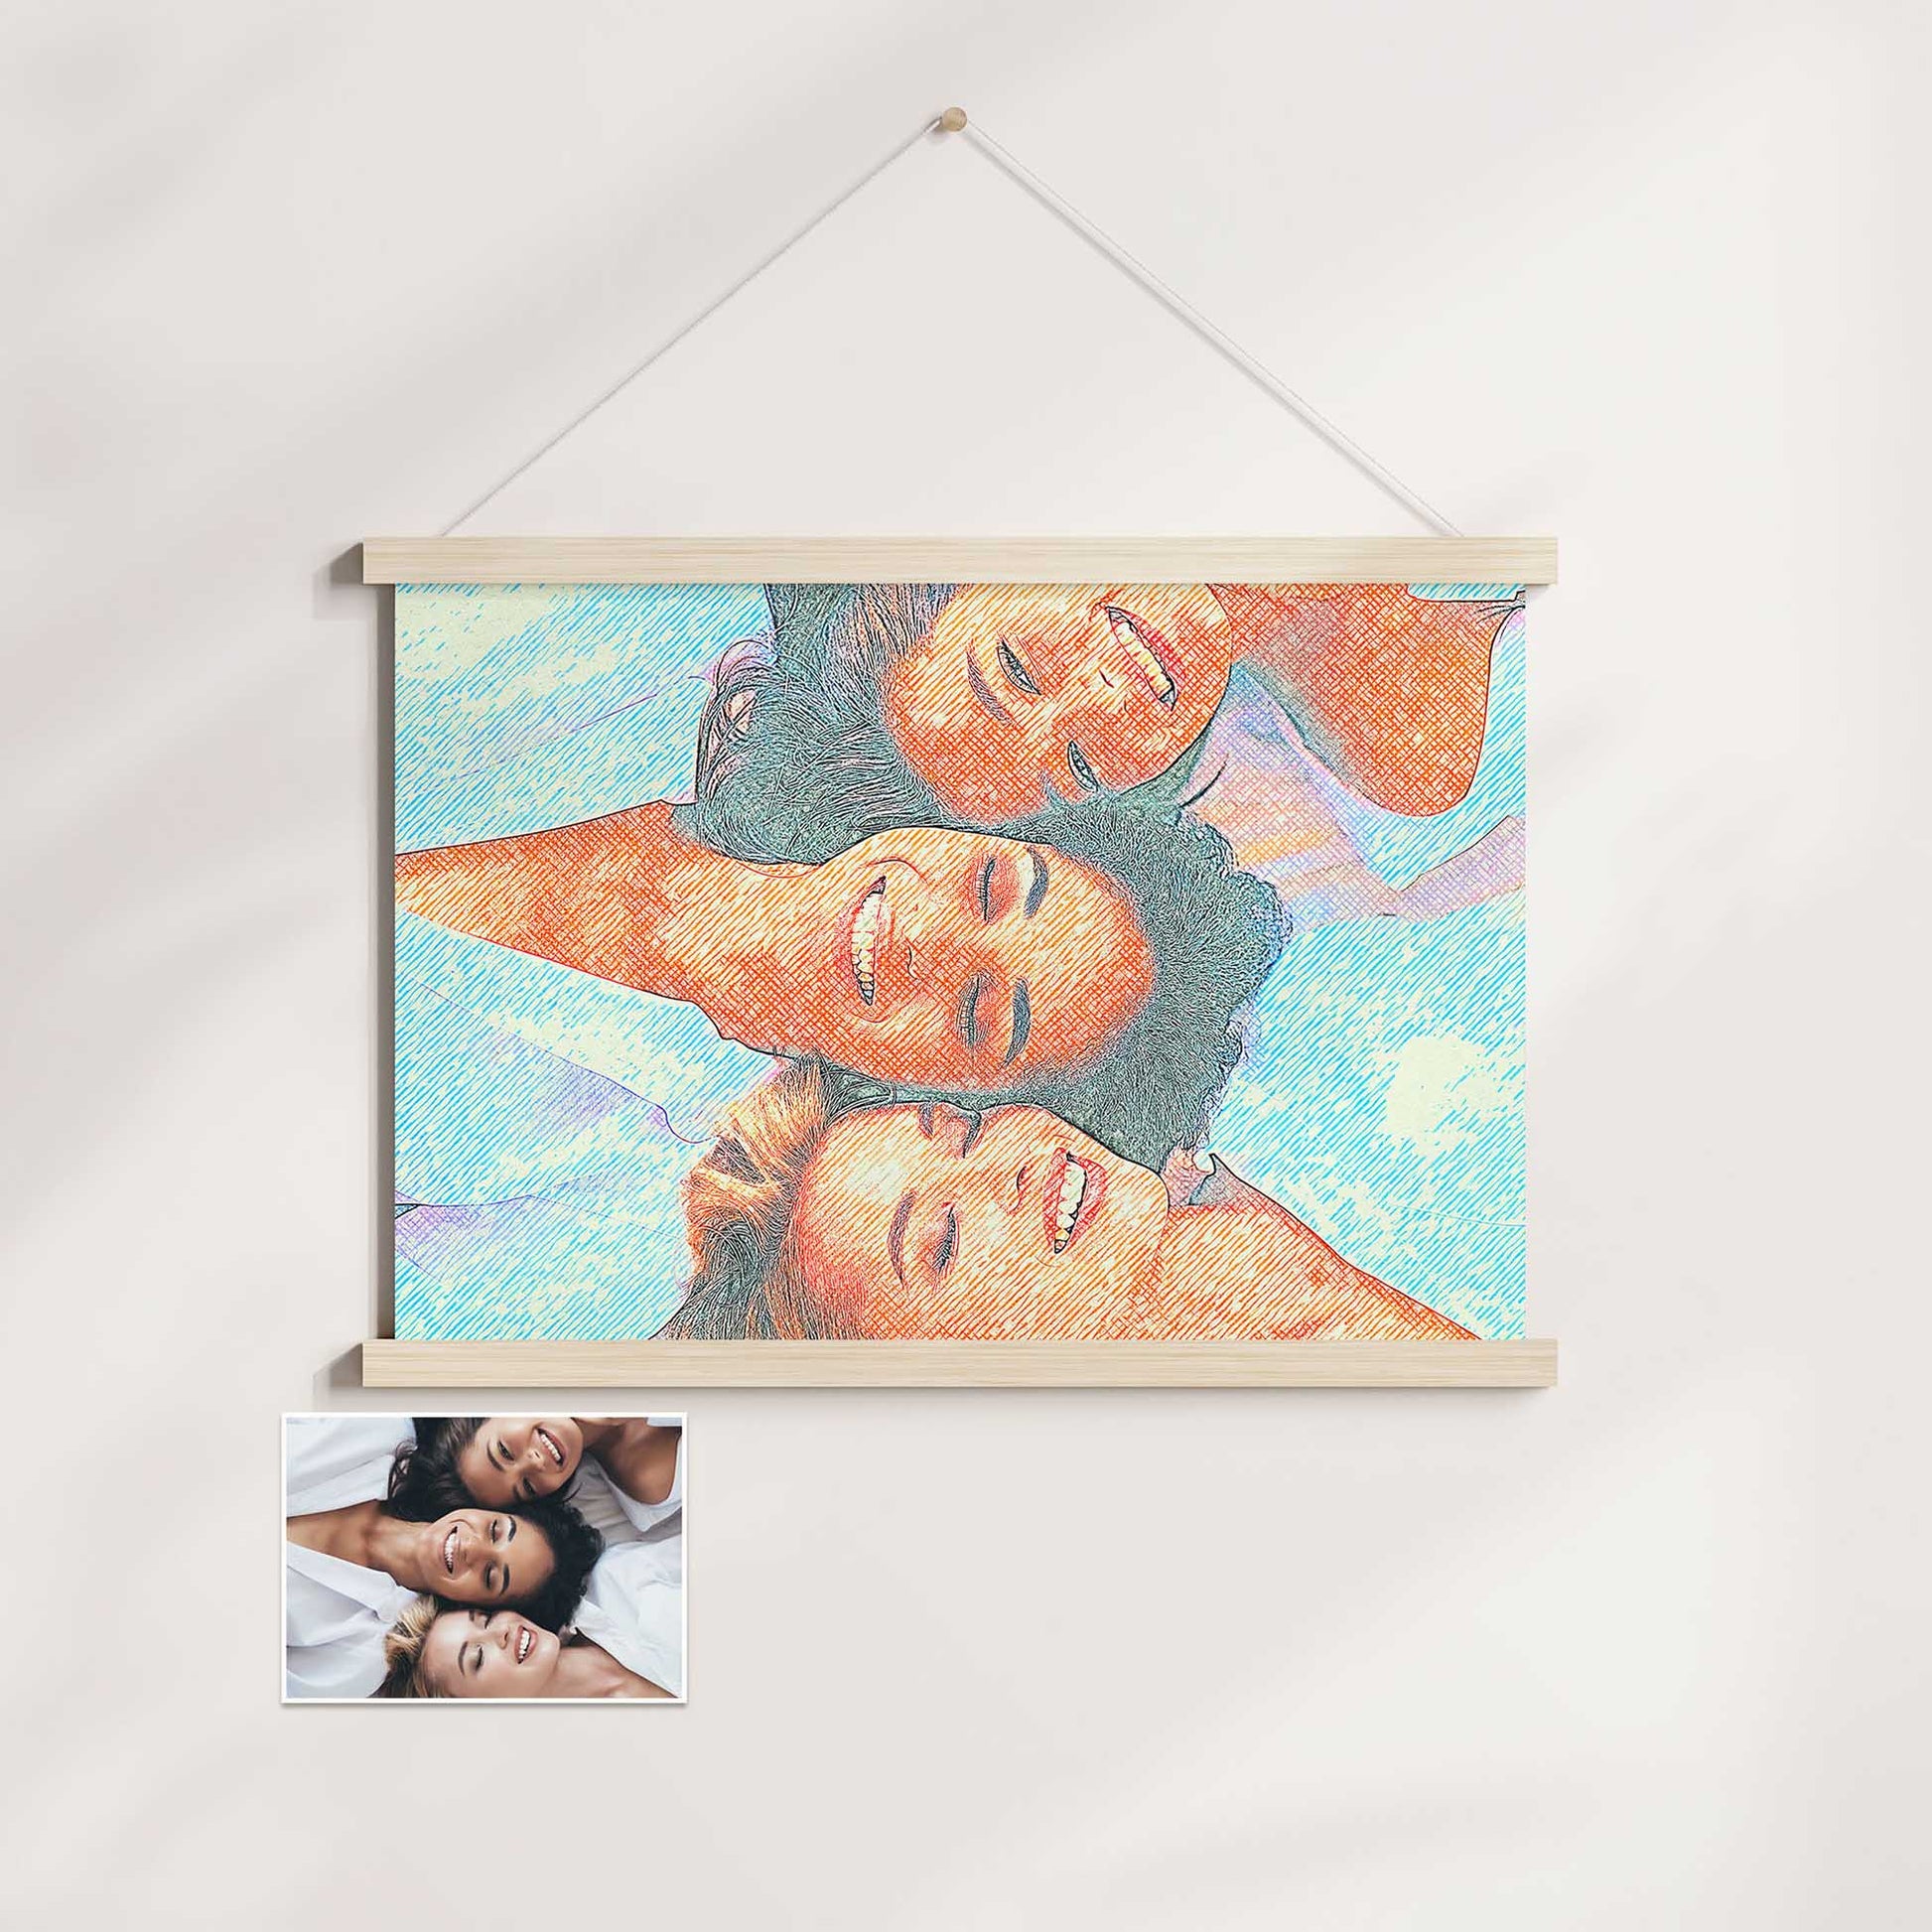 Drawing from Photo: Experience the cheer and inspiration of our Personalised Drawing Crosshatch Poster Hanger. The crosshatch texture effect brings your photo to life with vibrant colors and intricate details. Hang this museum-quality paper